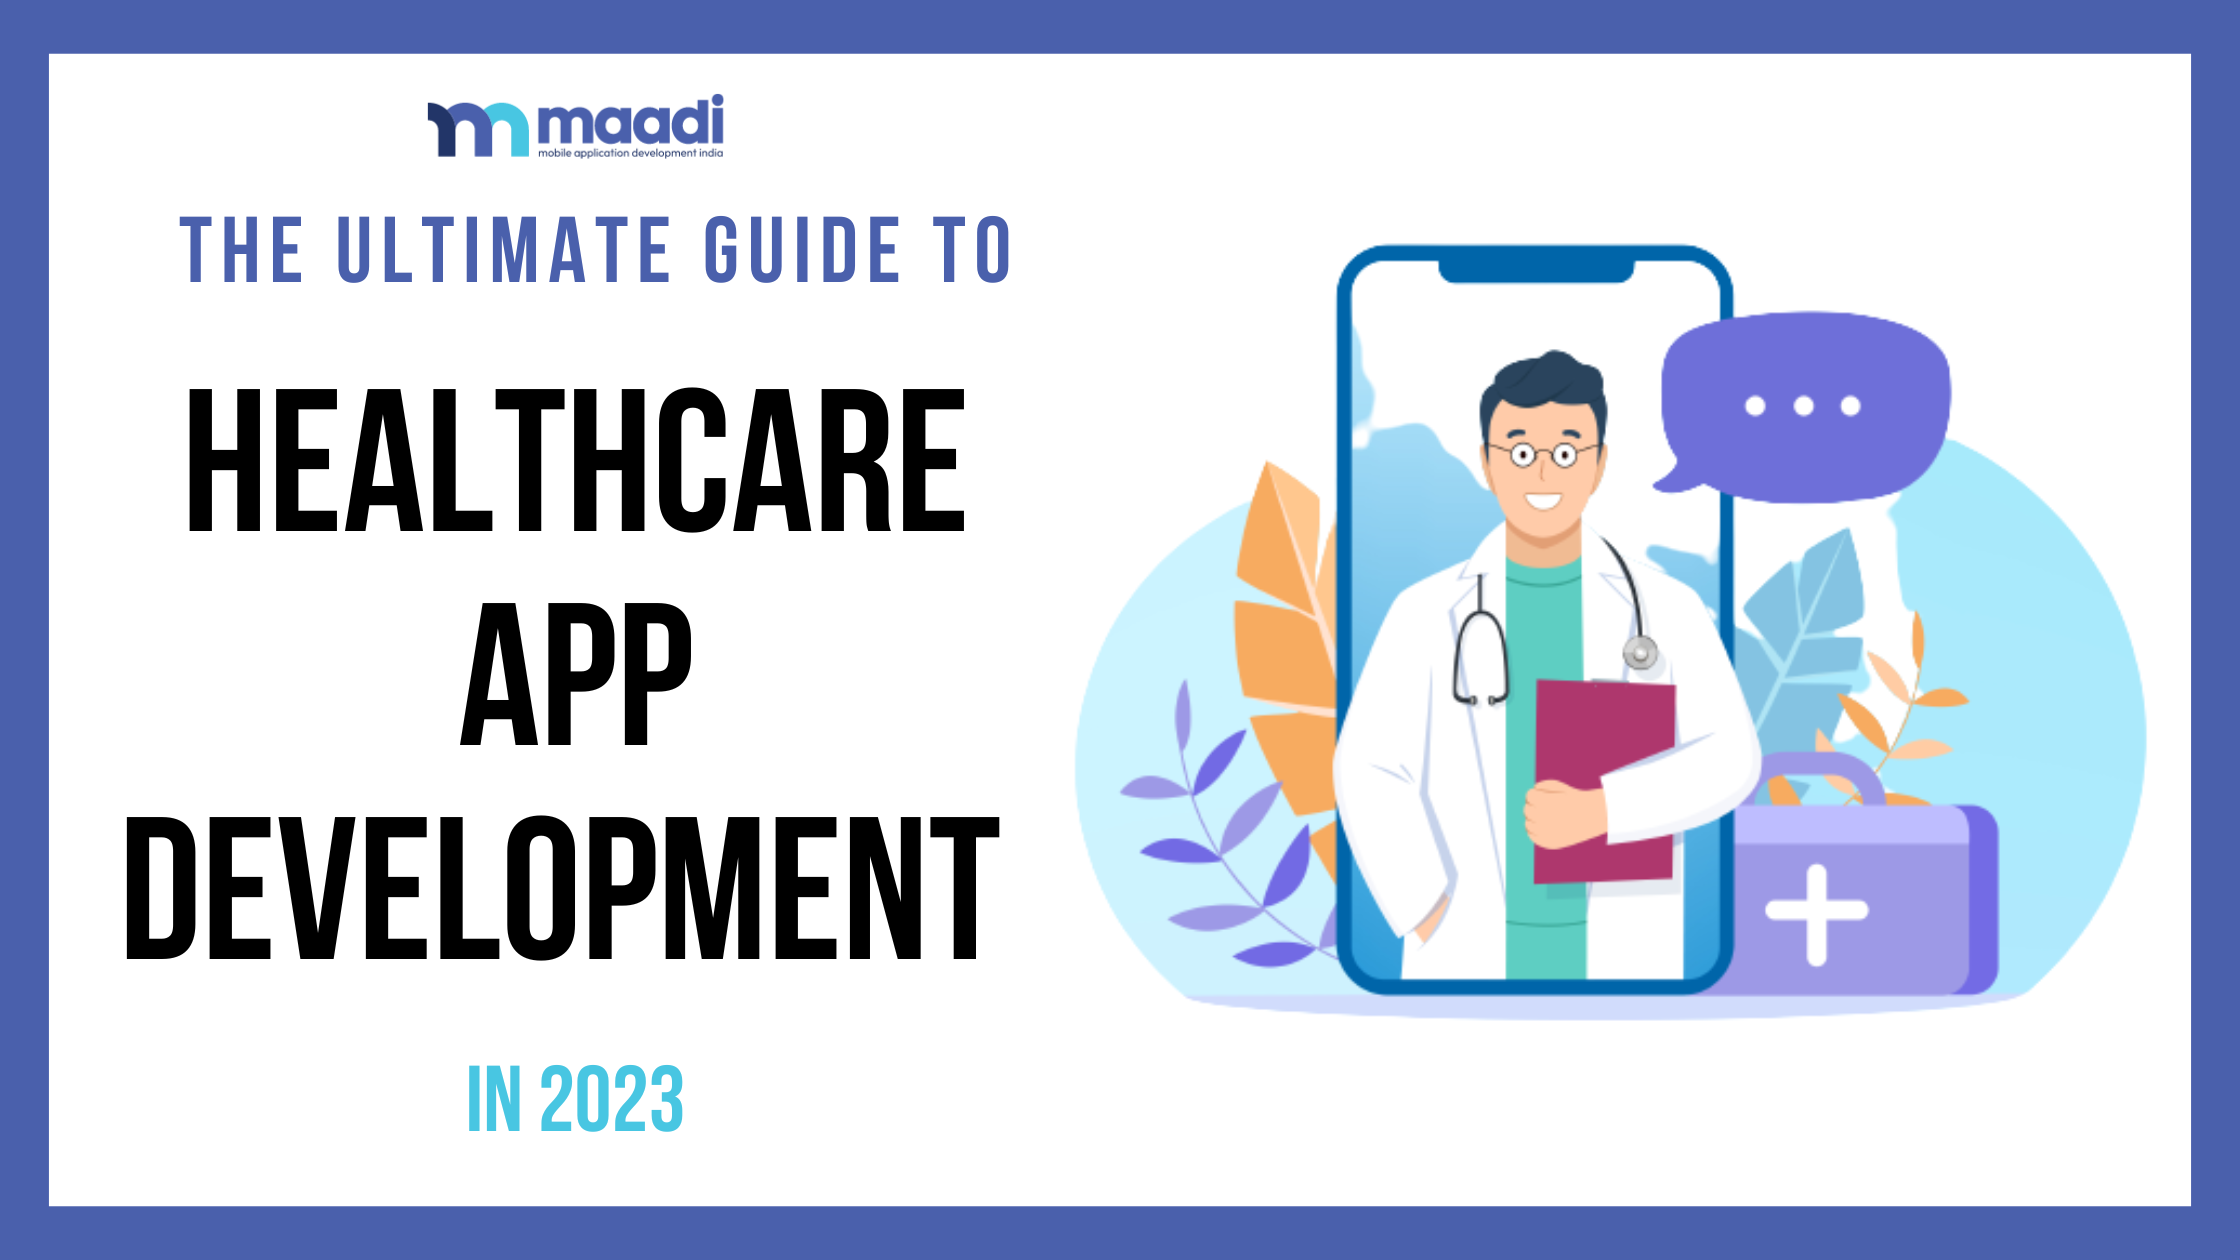 The Ultimate Guide to Healthcare App Development in 2023